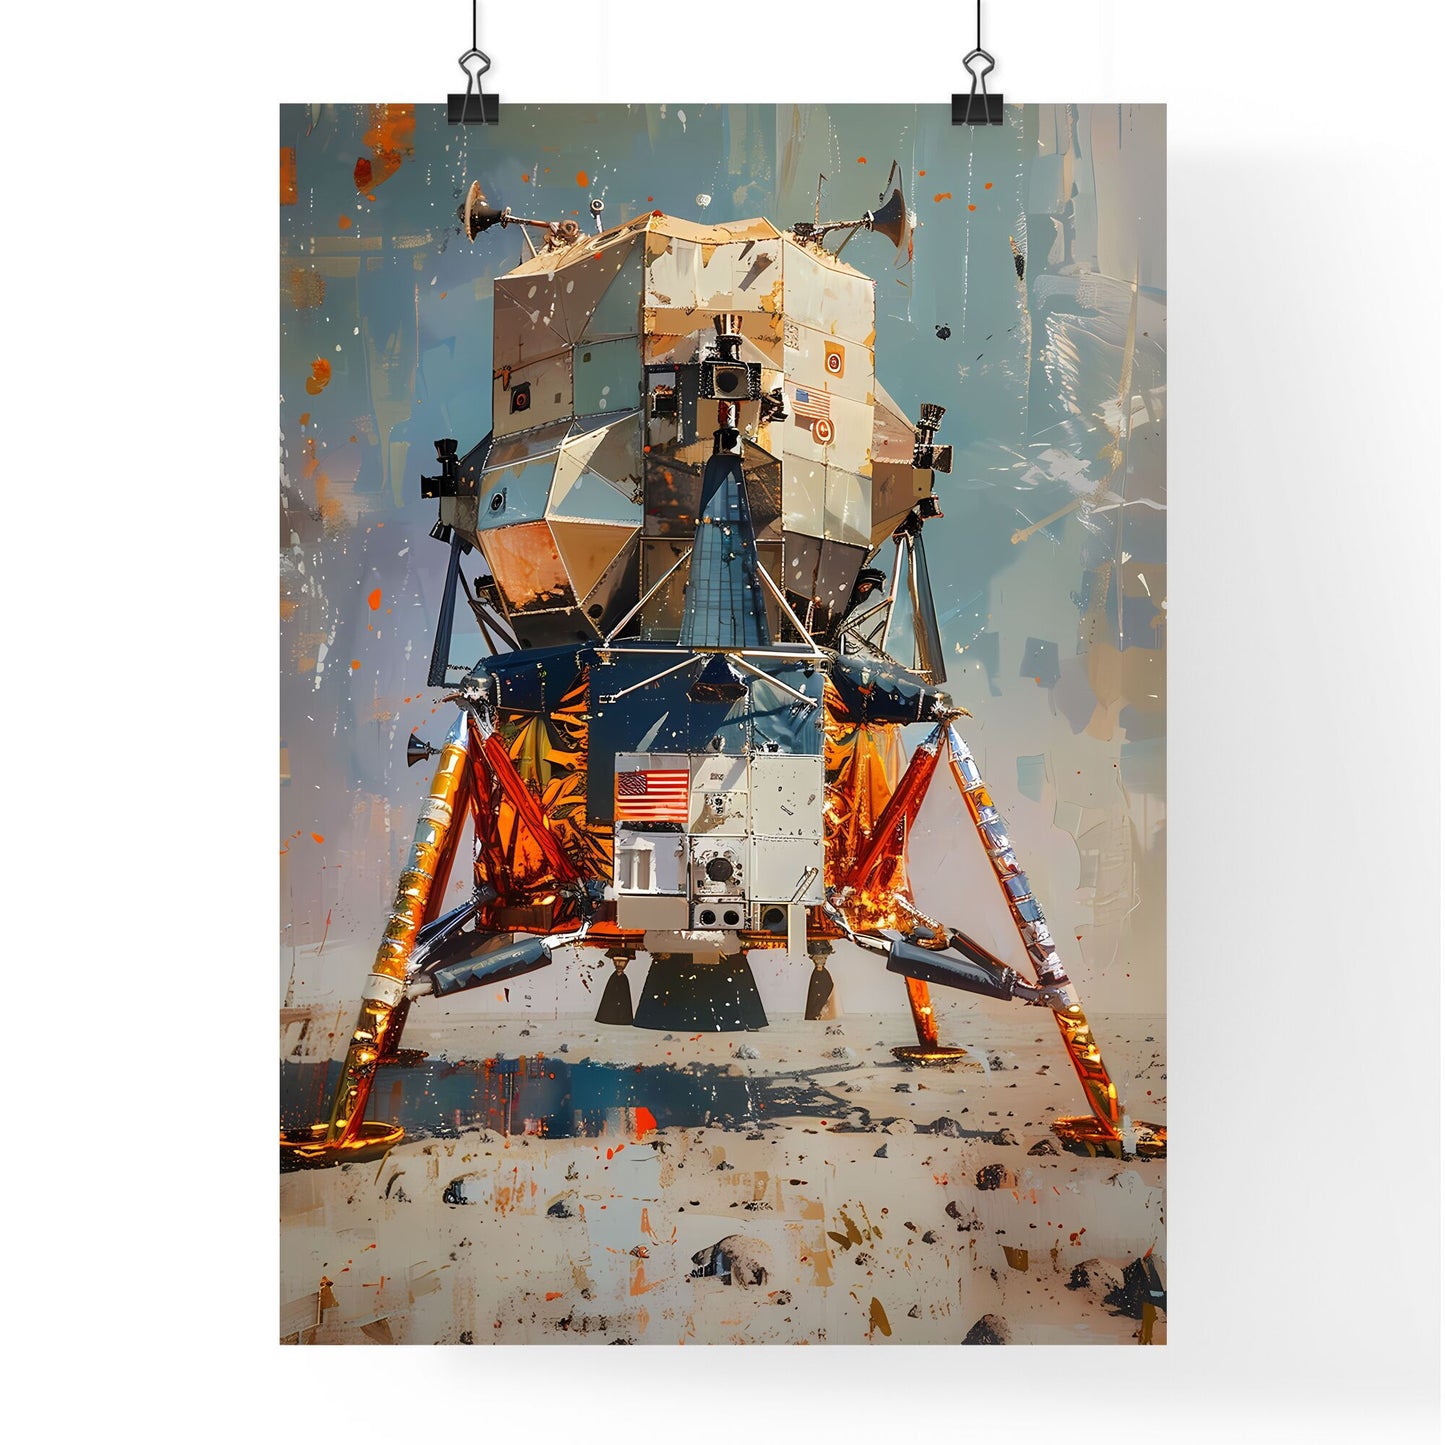 Impressionist Painting of Apollo Lunar Module Liftoff at Dawn on the Moon in 1969 Default Title